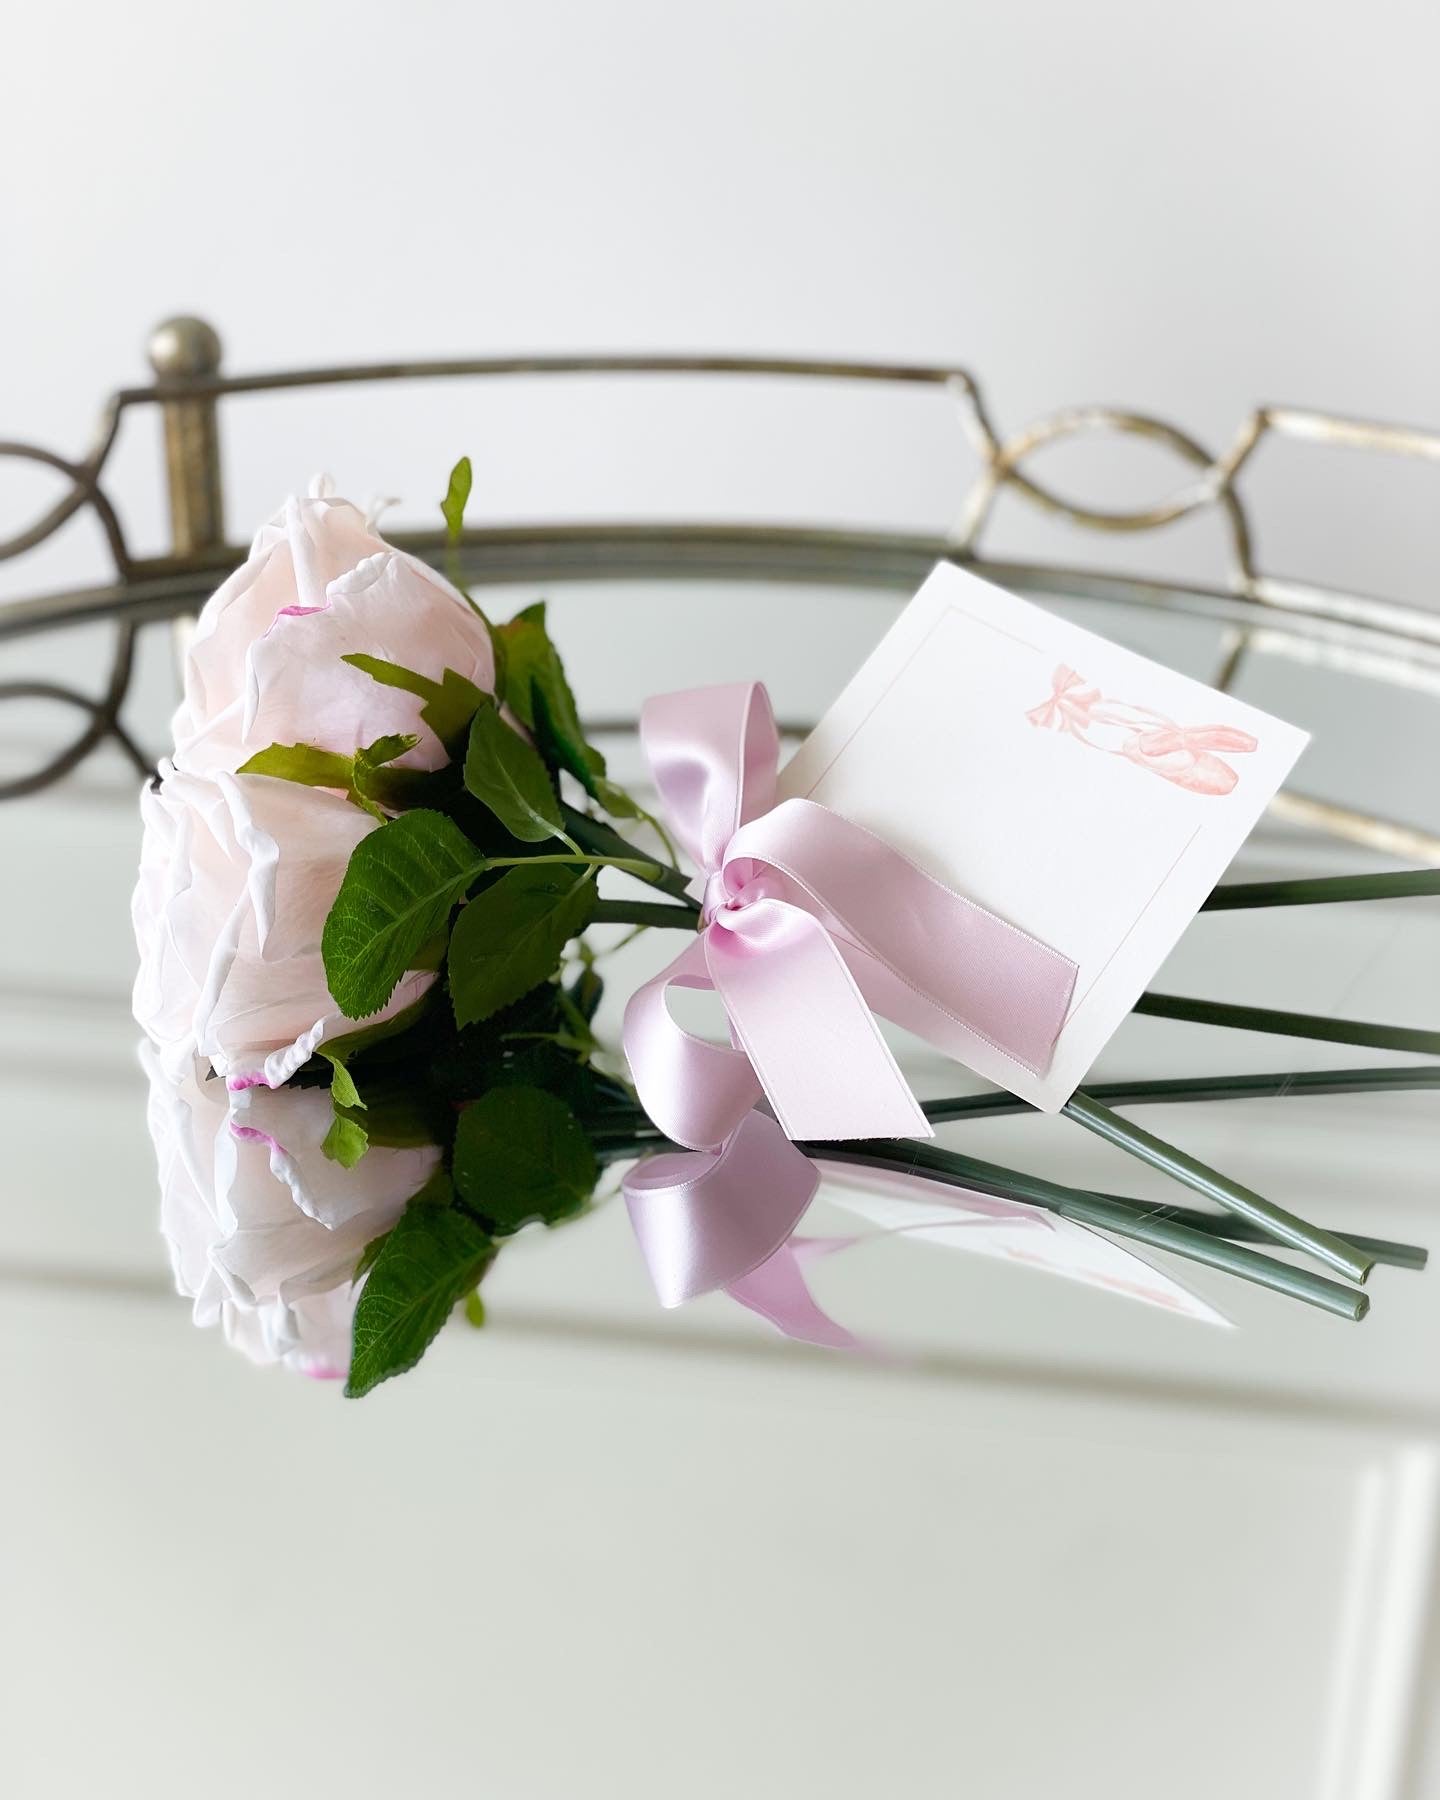 Blush Rose Trio With Satin Ribbon And Card